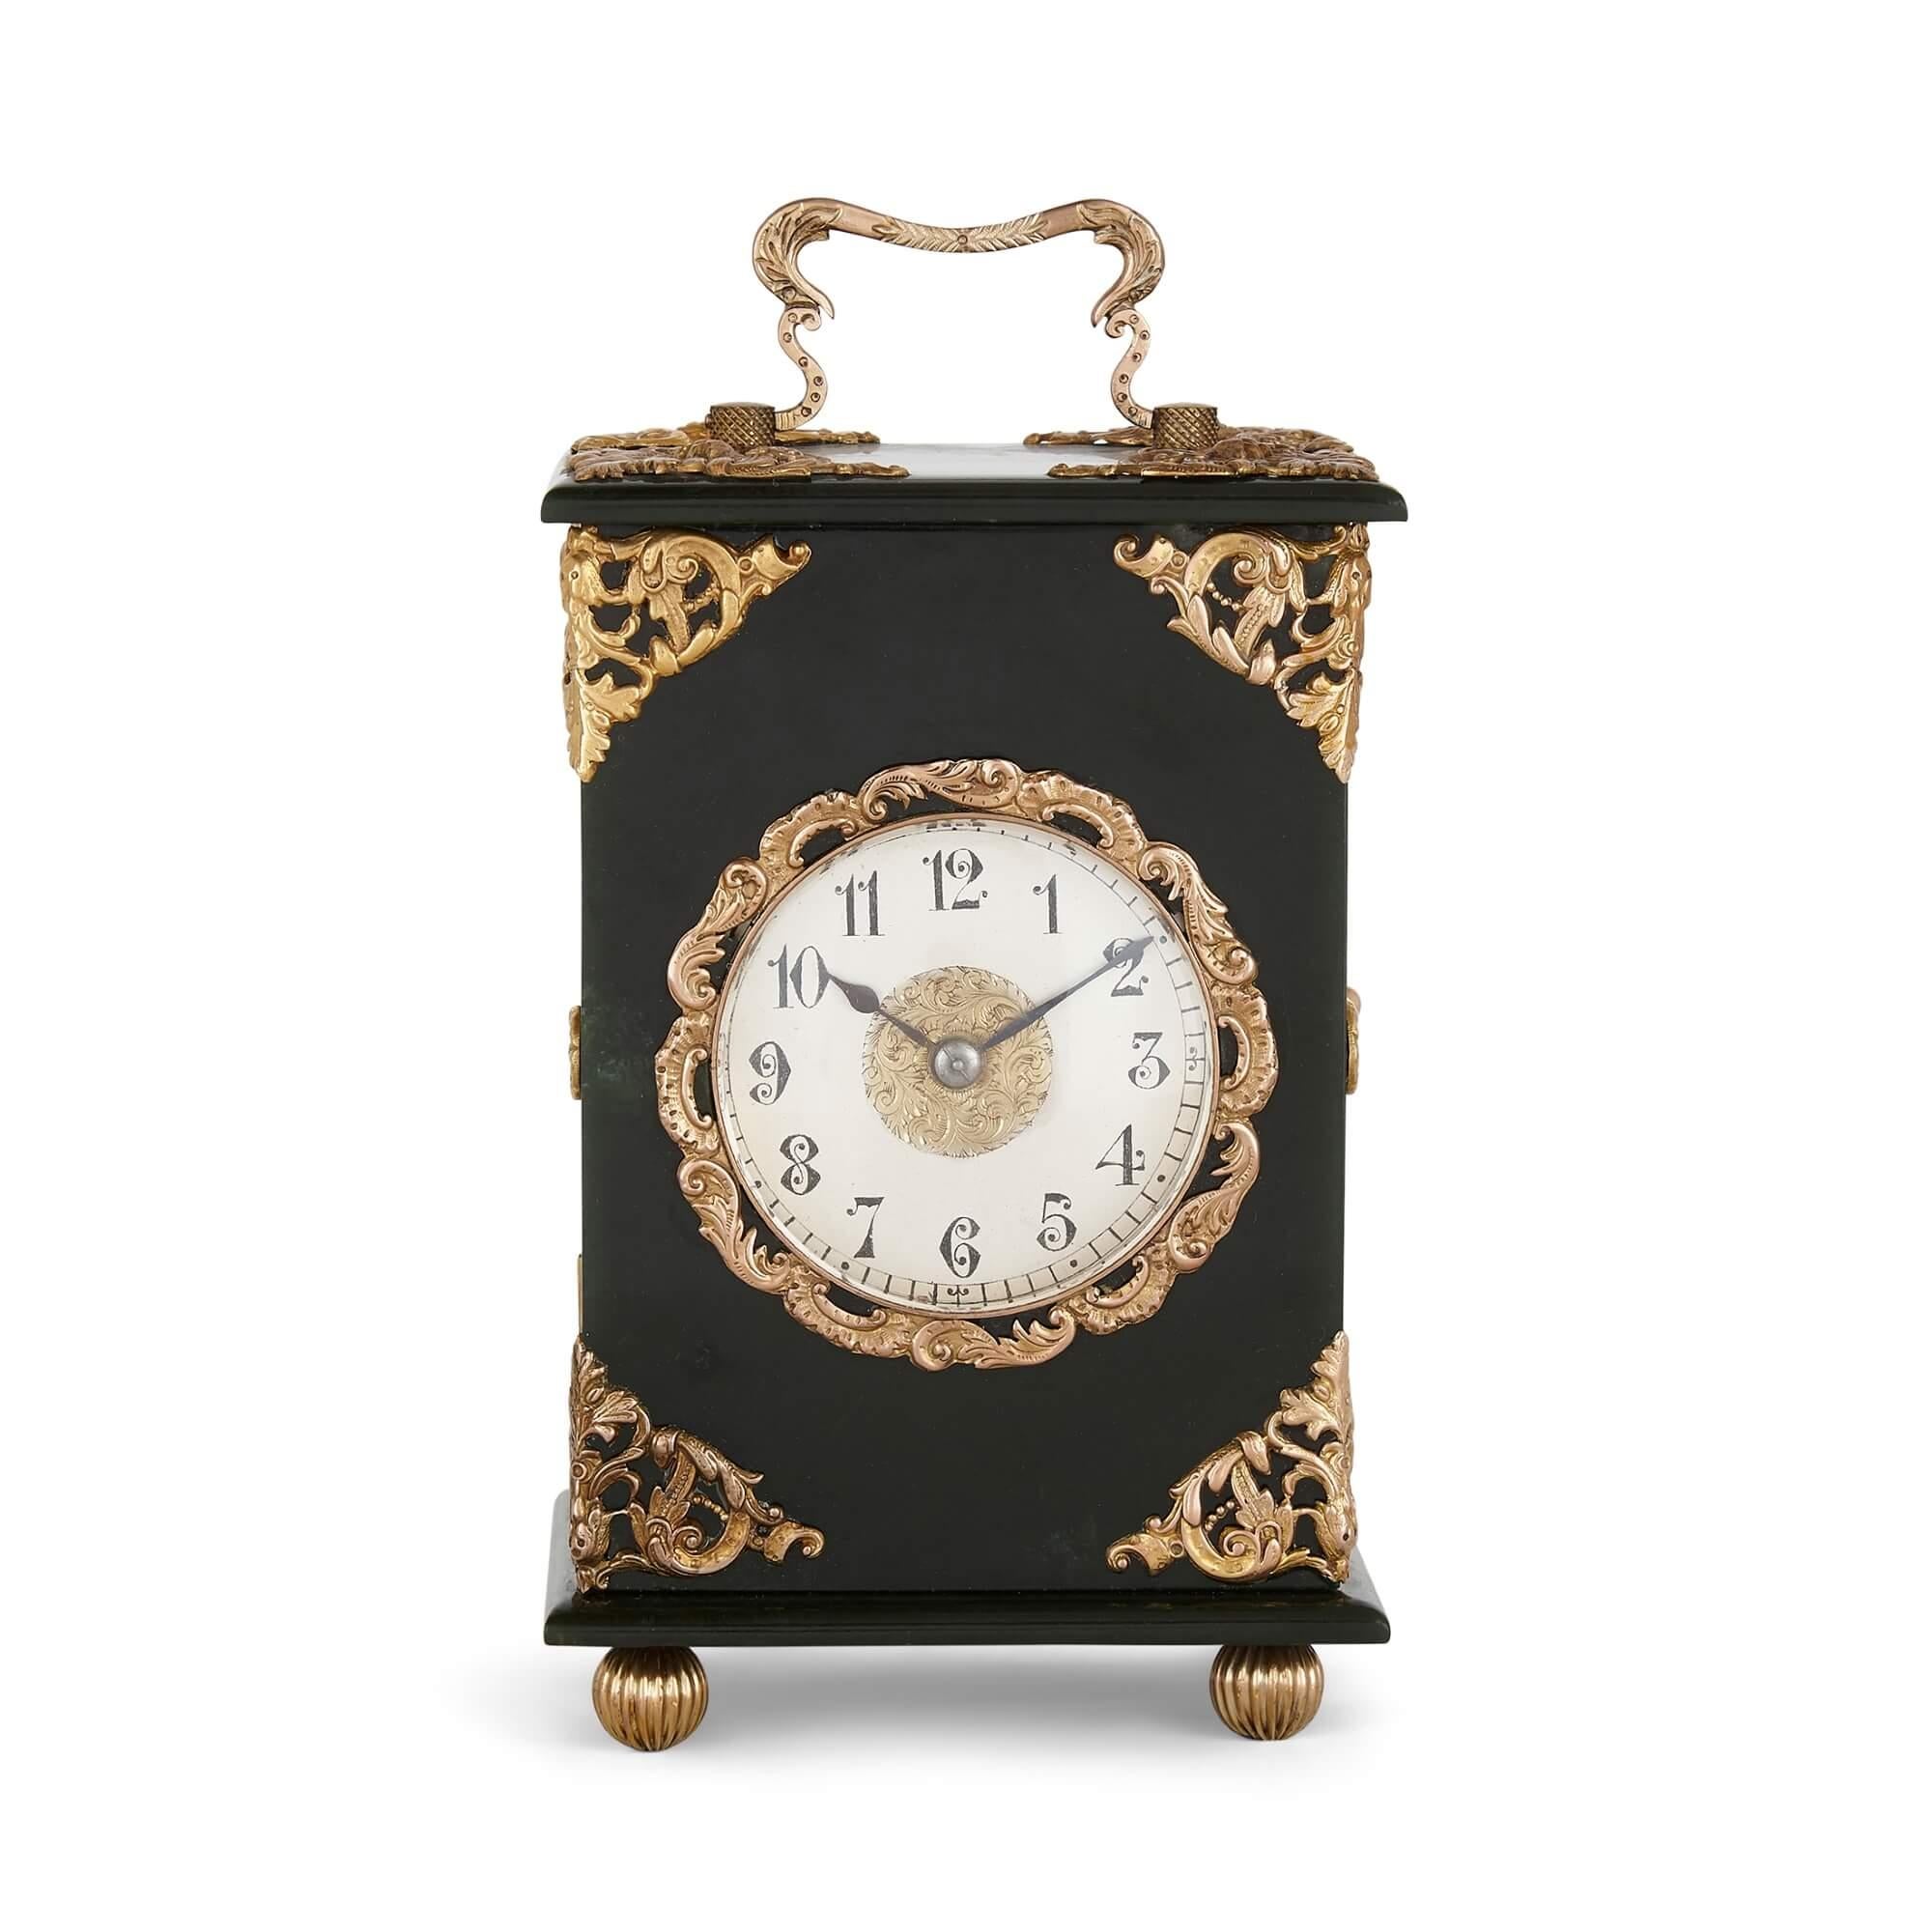 French Belle Époque green nephrite carriage clock mounted with gold
French, c. 1900
Measures: Height 14.5cm, width 9cm, depth 7.5cm

This charming carriage clock is crafted from nephrite and gold. The rectangular case of the clock is carved from